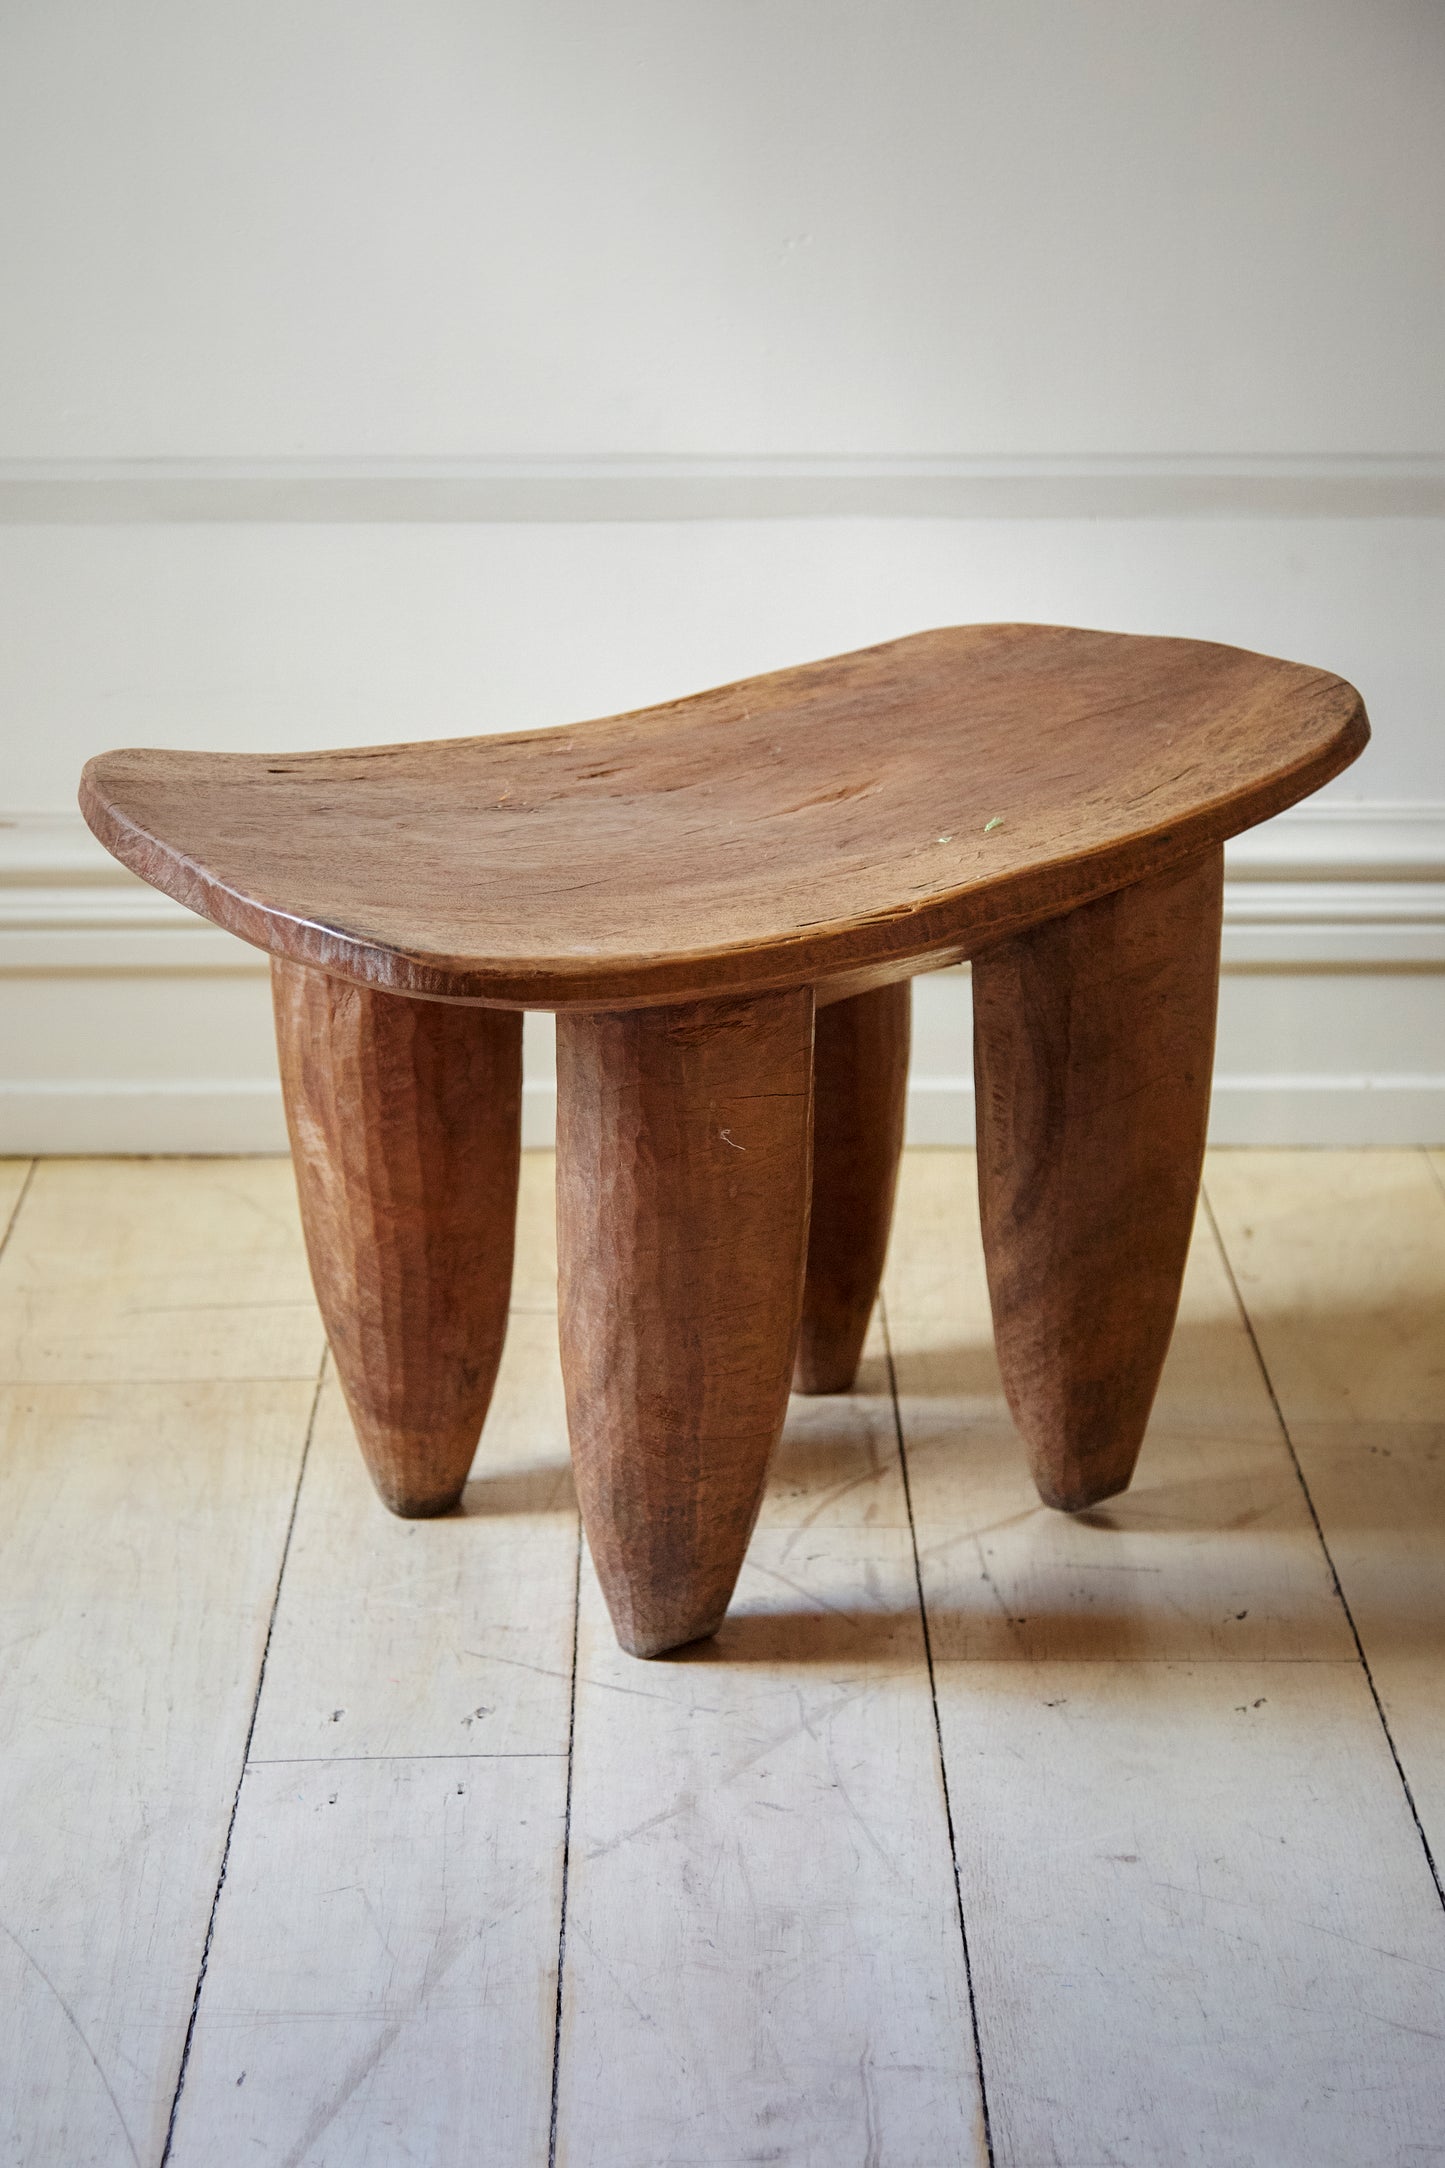 African wooden stool